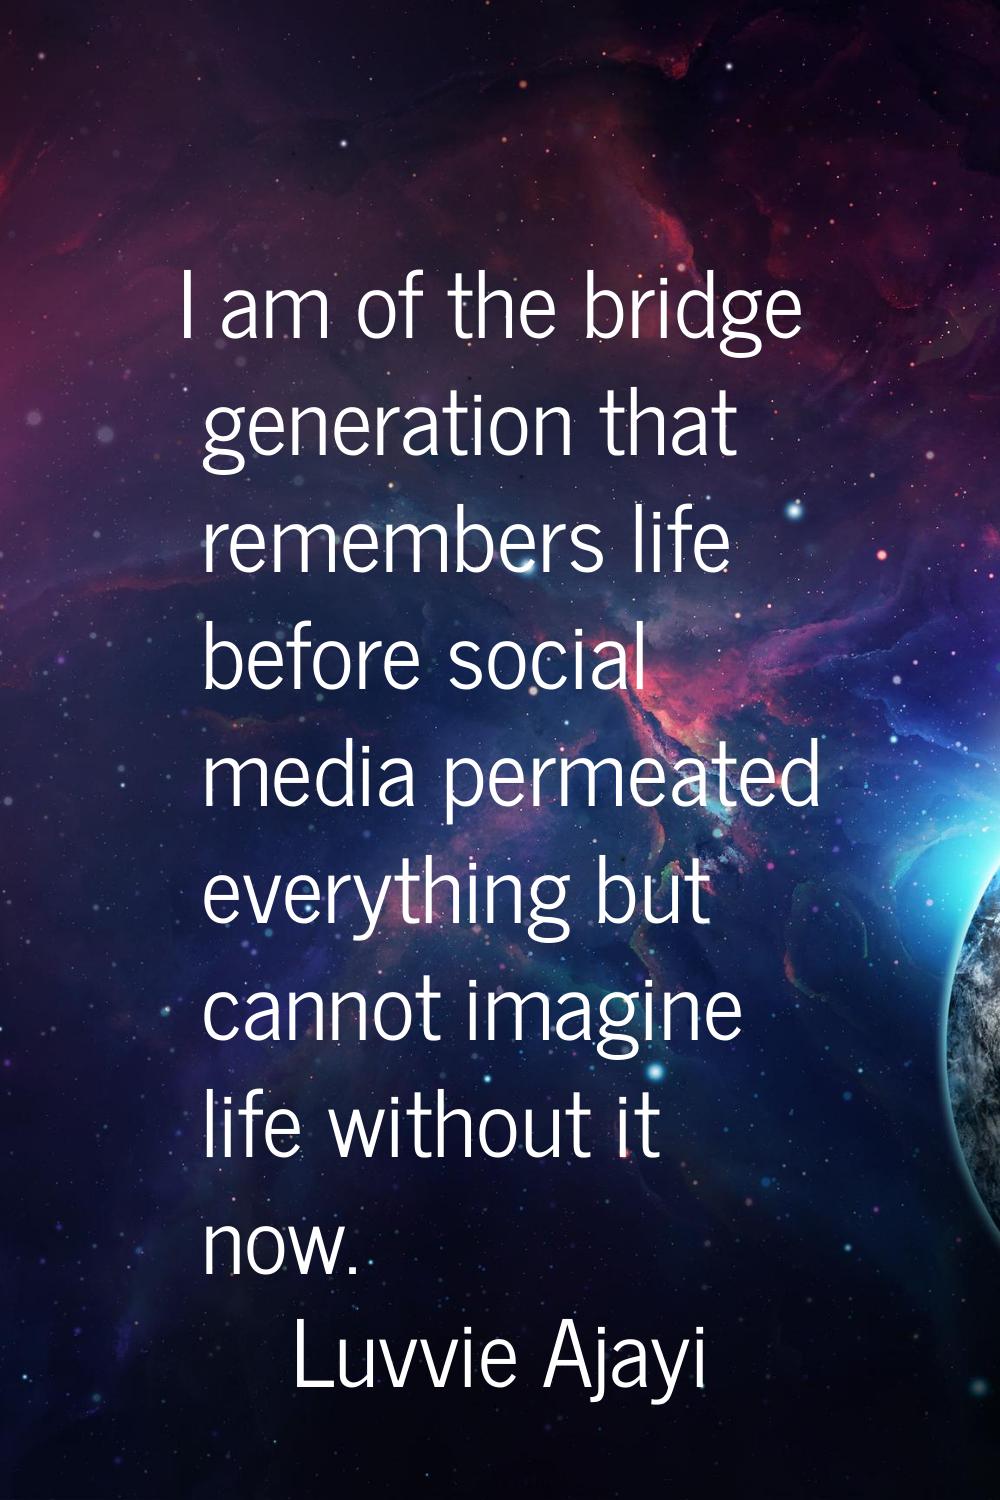 I am of the bridge generation that remembers life before social media permeated everything but cann